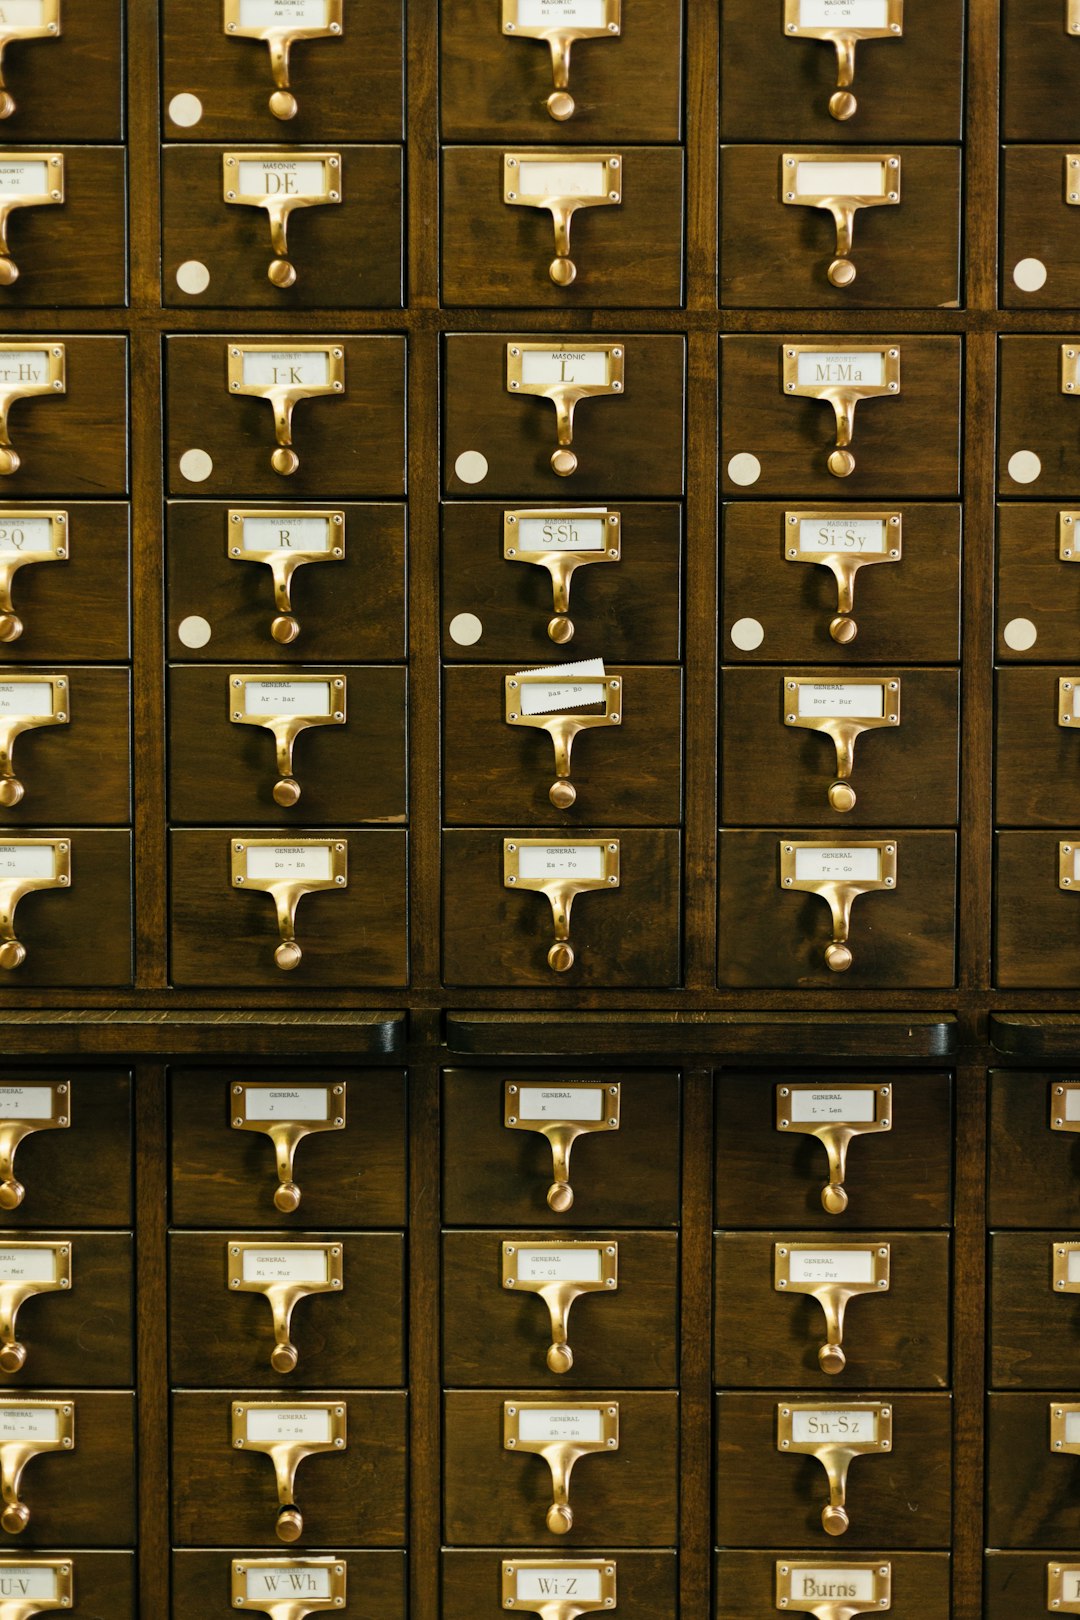 The Freemason building in Washington, D.C., houses a large library — open to the public. This was a card catalog I saw inside their collections.